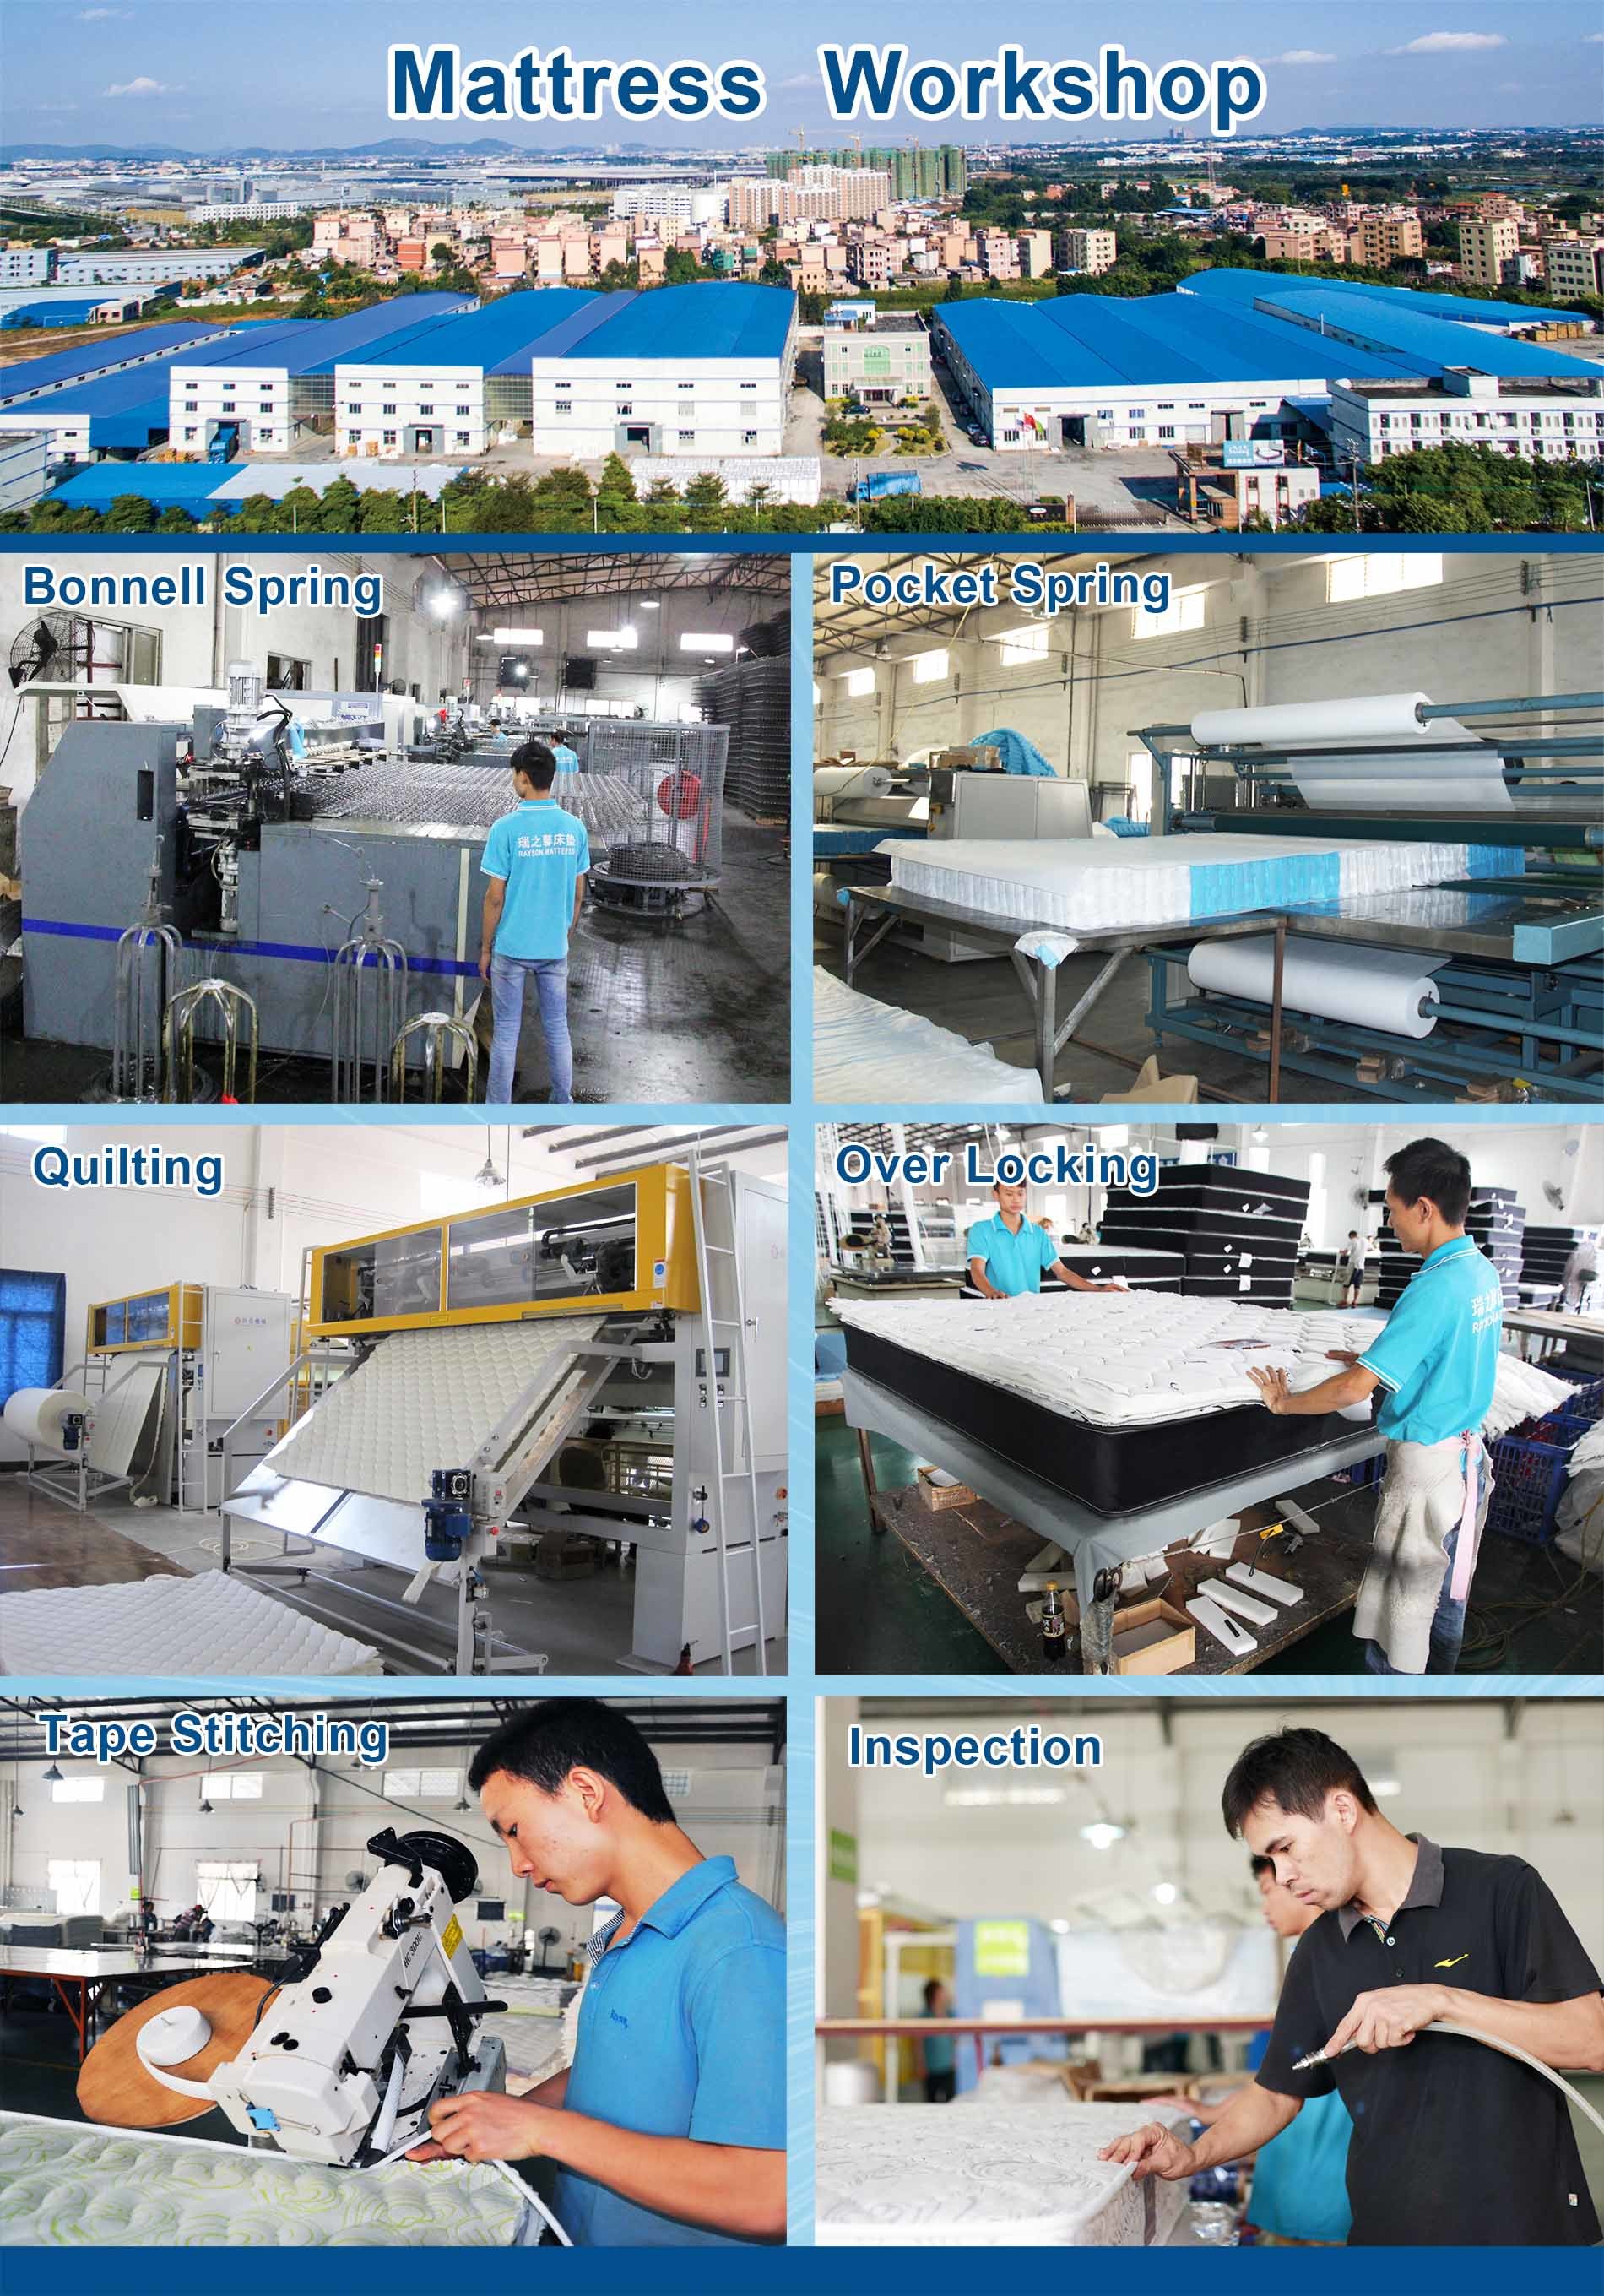 available best pocket coil mattress wholesale high density